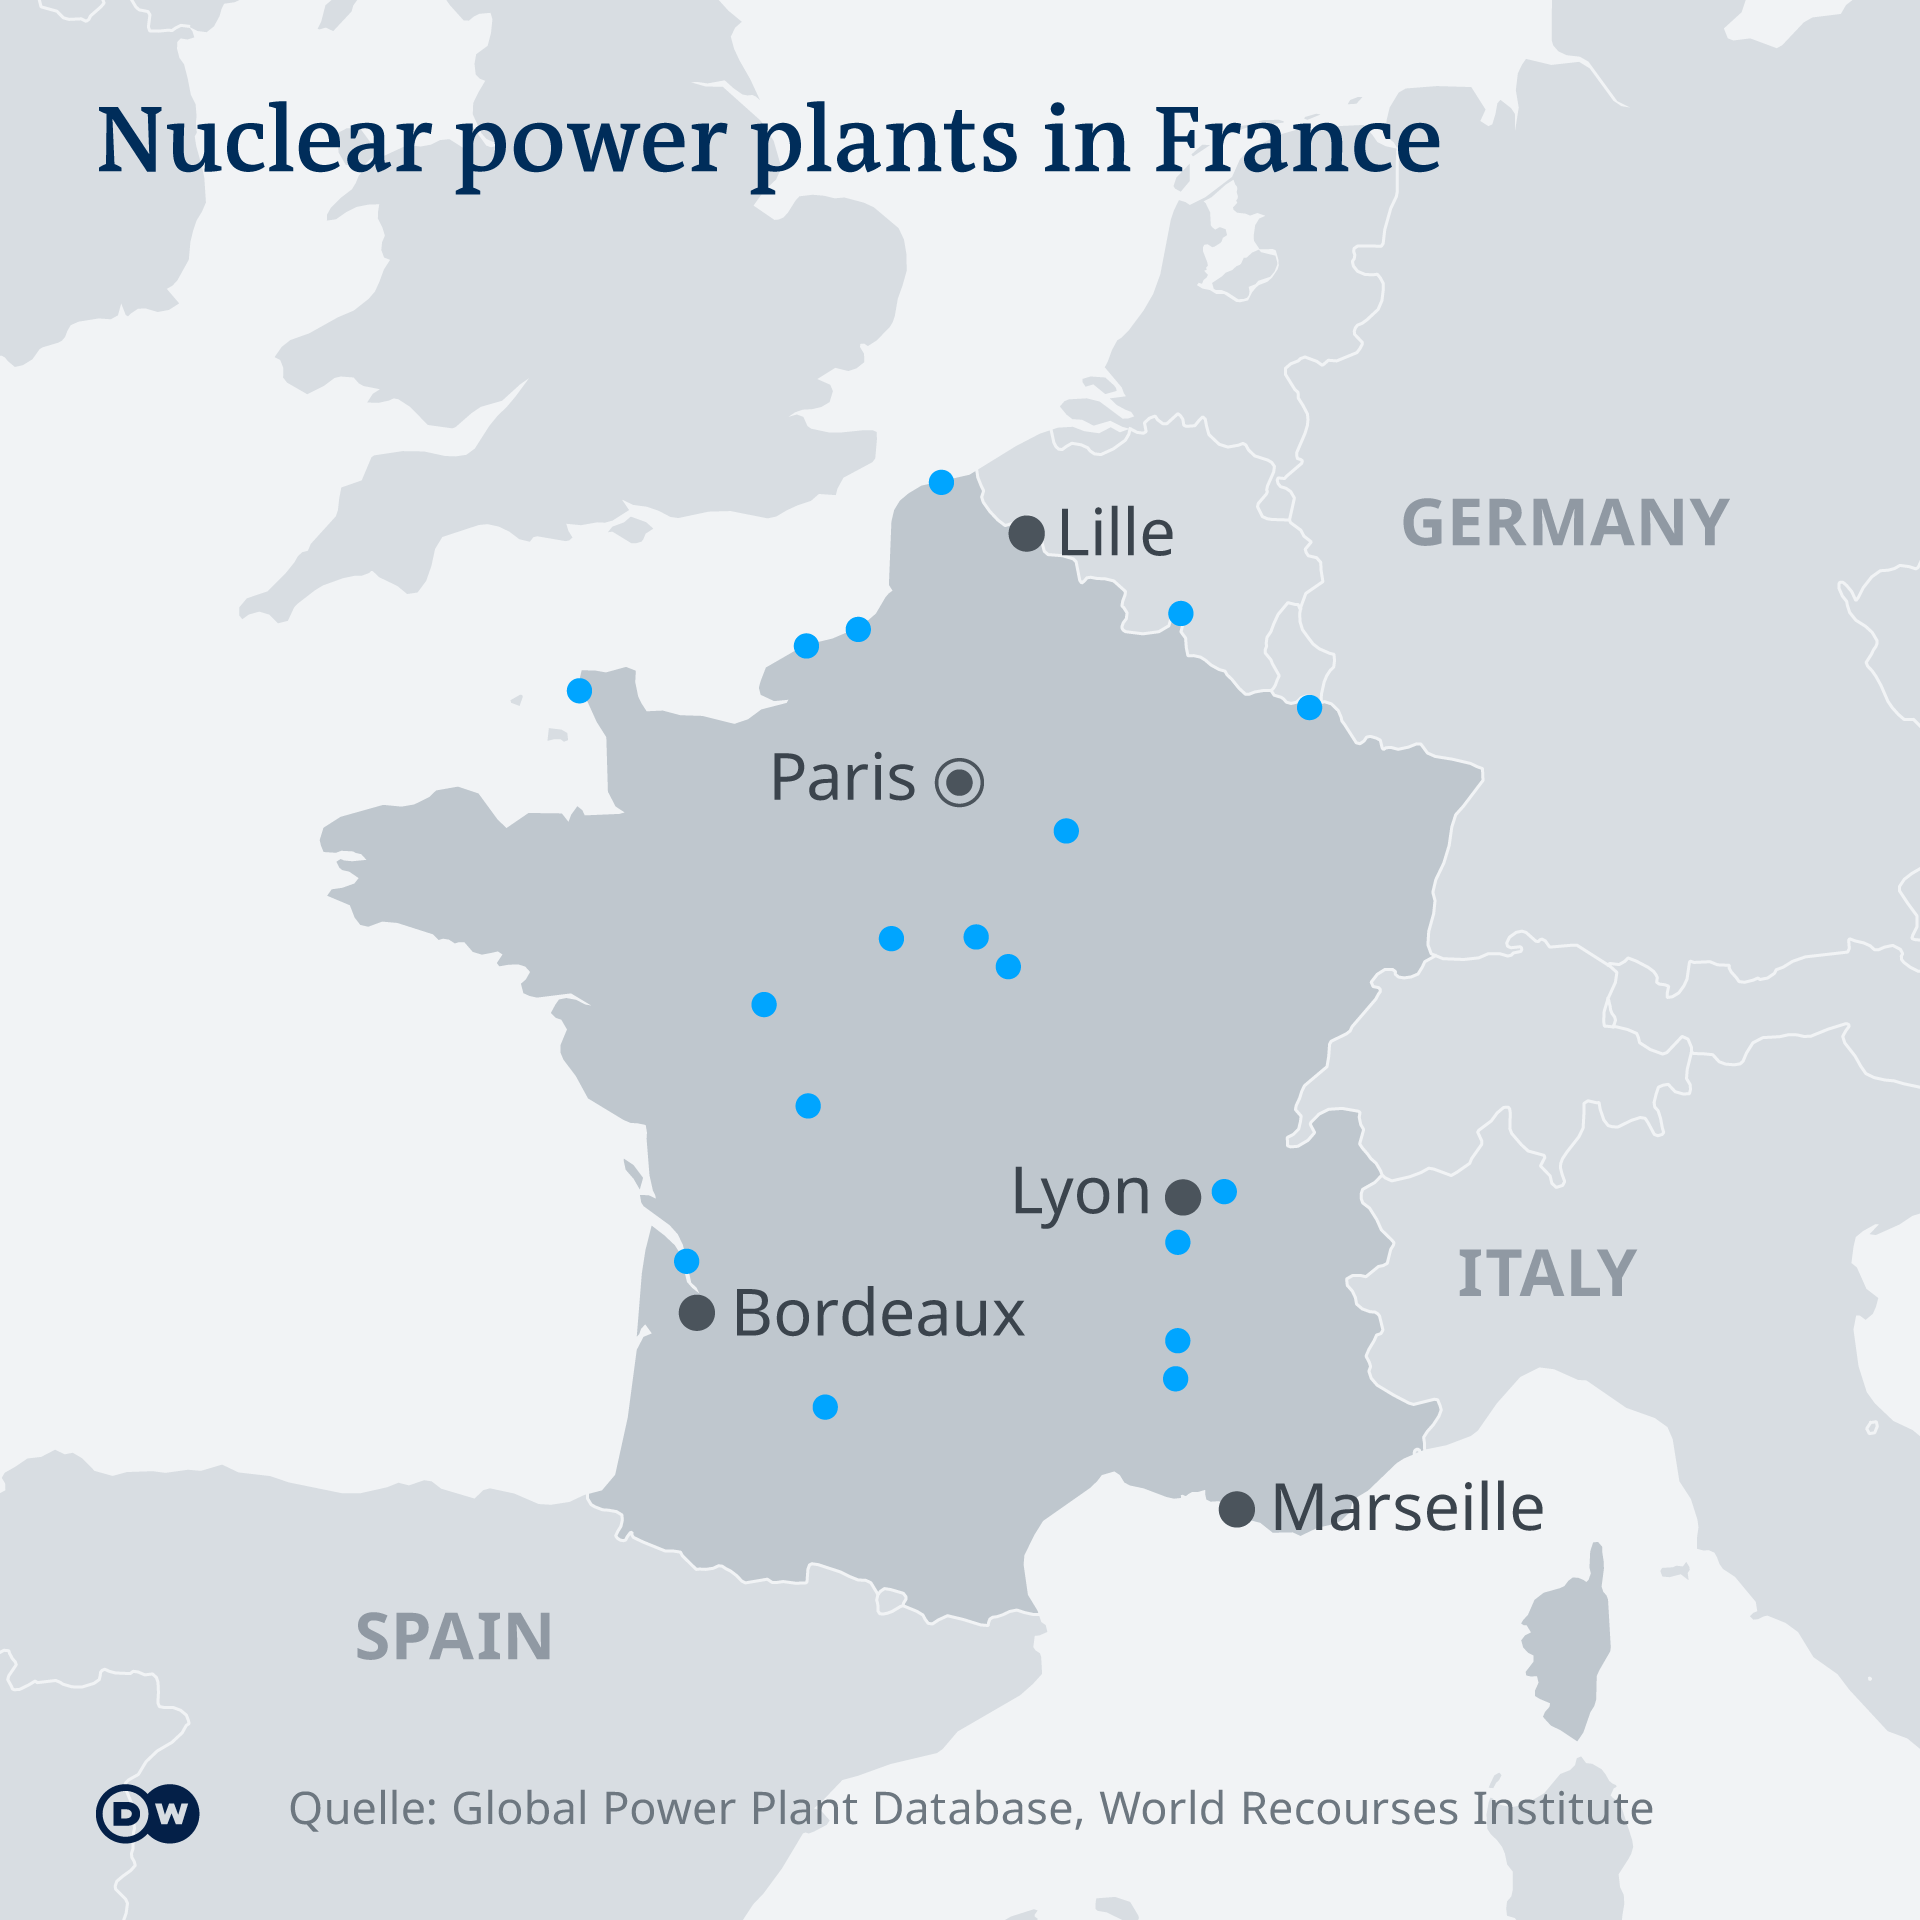 Infographic showing nuclear power plants in France